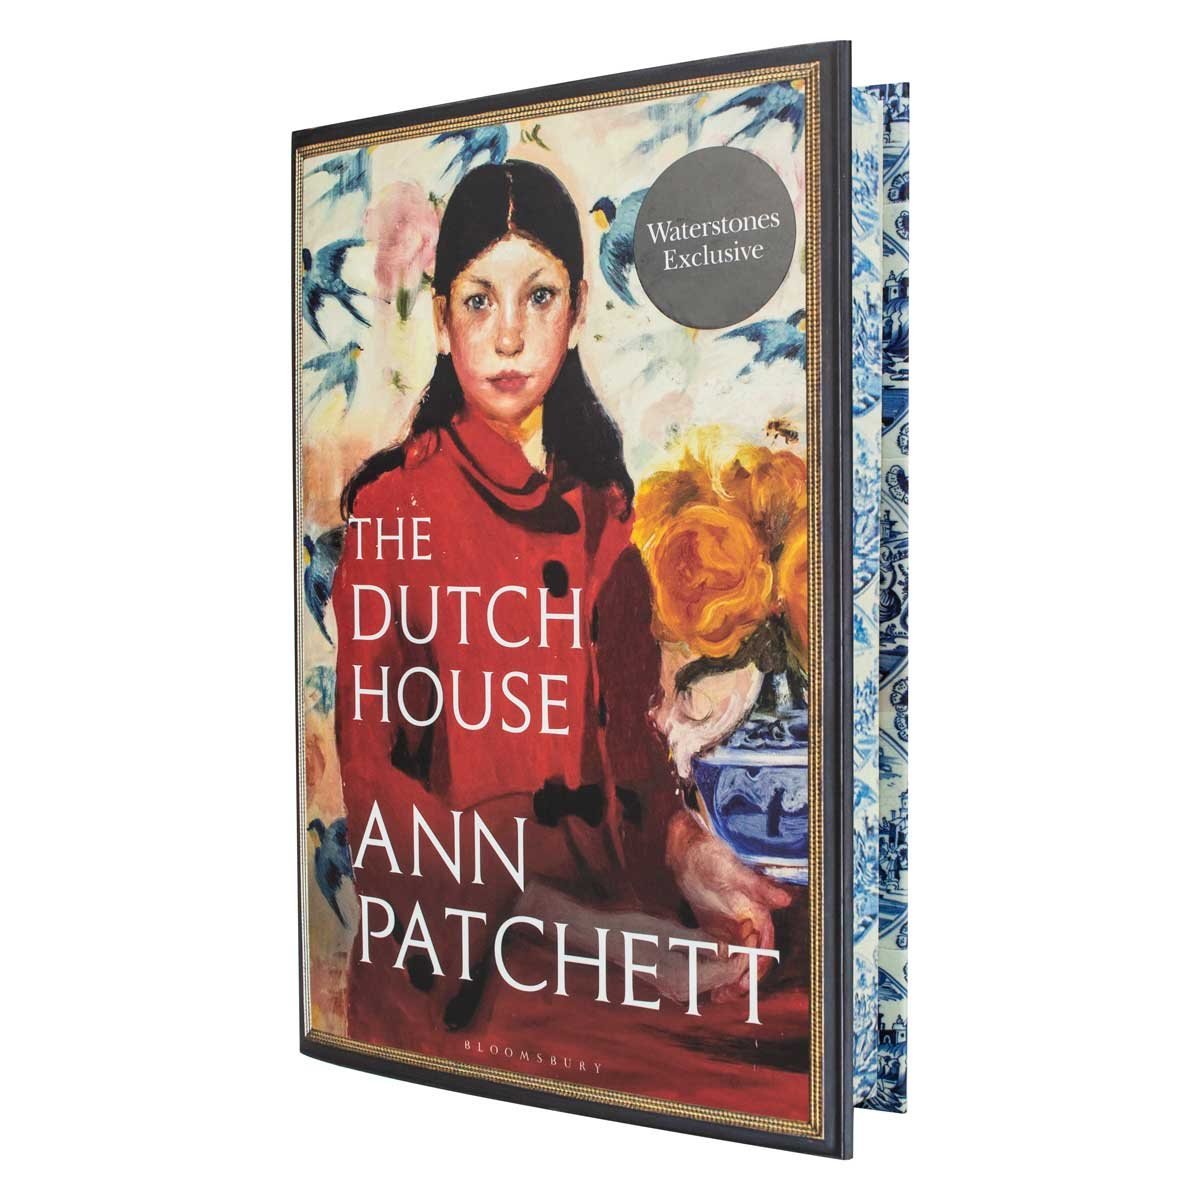 the dutch house by ann patchett narrated by tom hanks